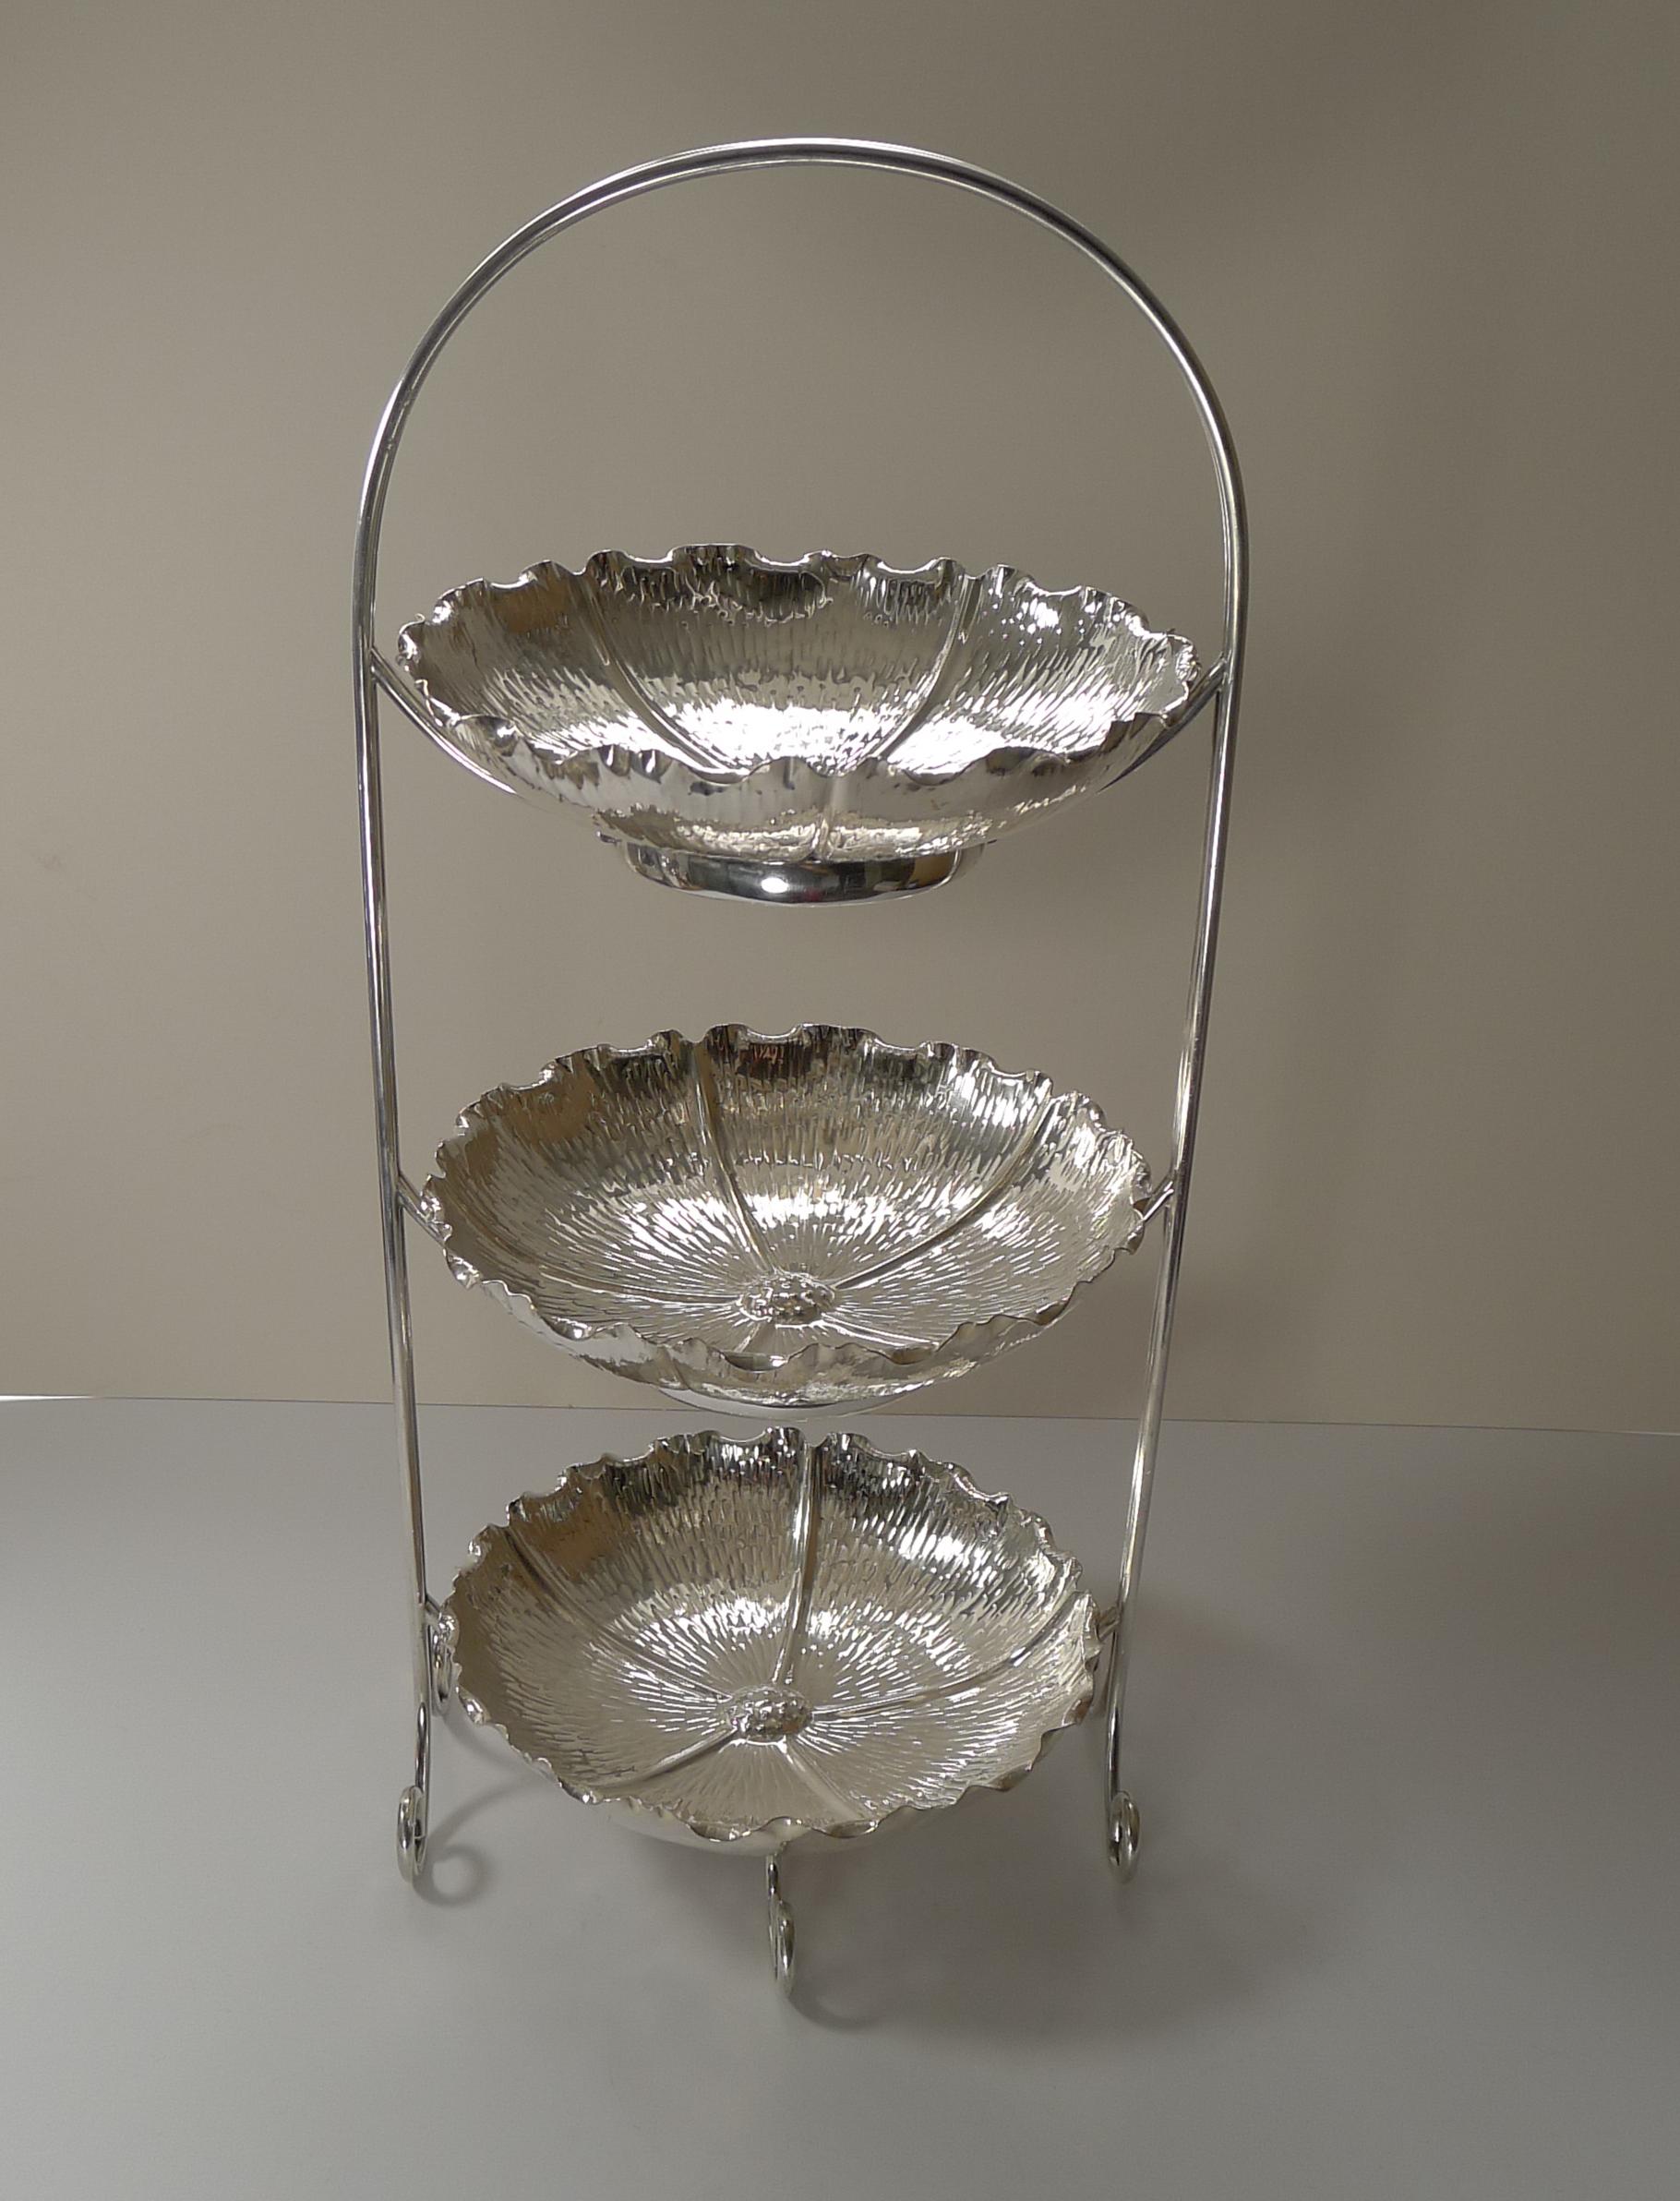 Early 20th Century Rare Three Tier Naturalistic Cake Stand by Hukin and Heath For Sale